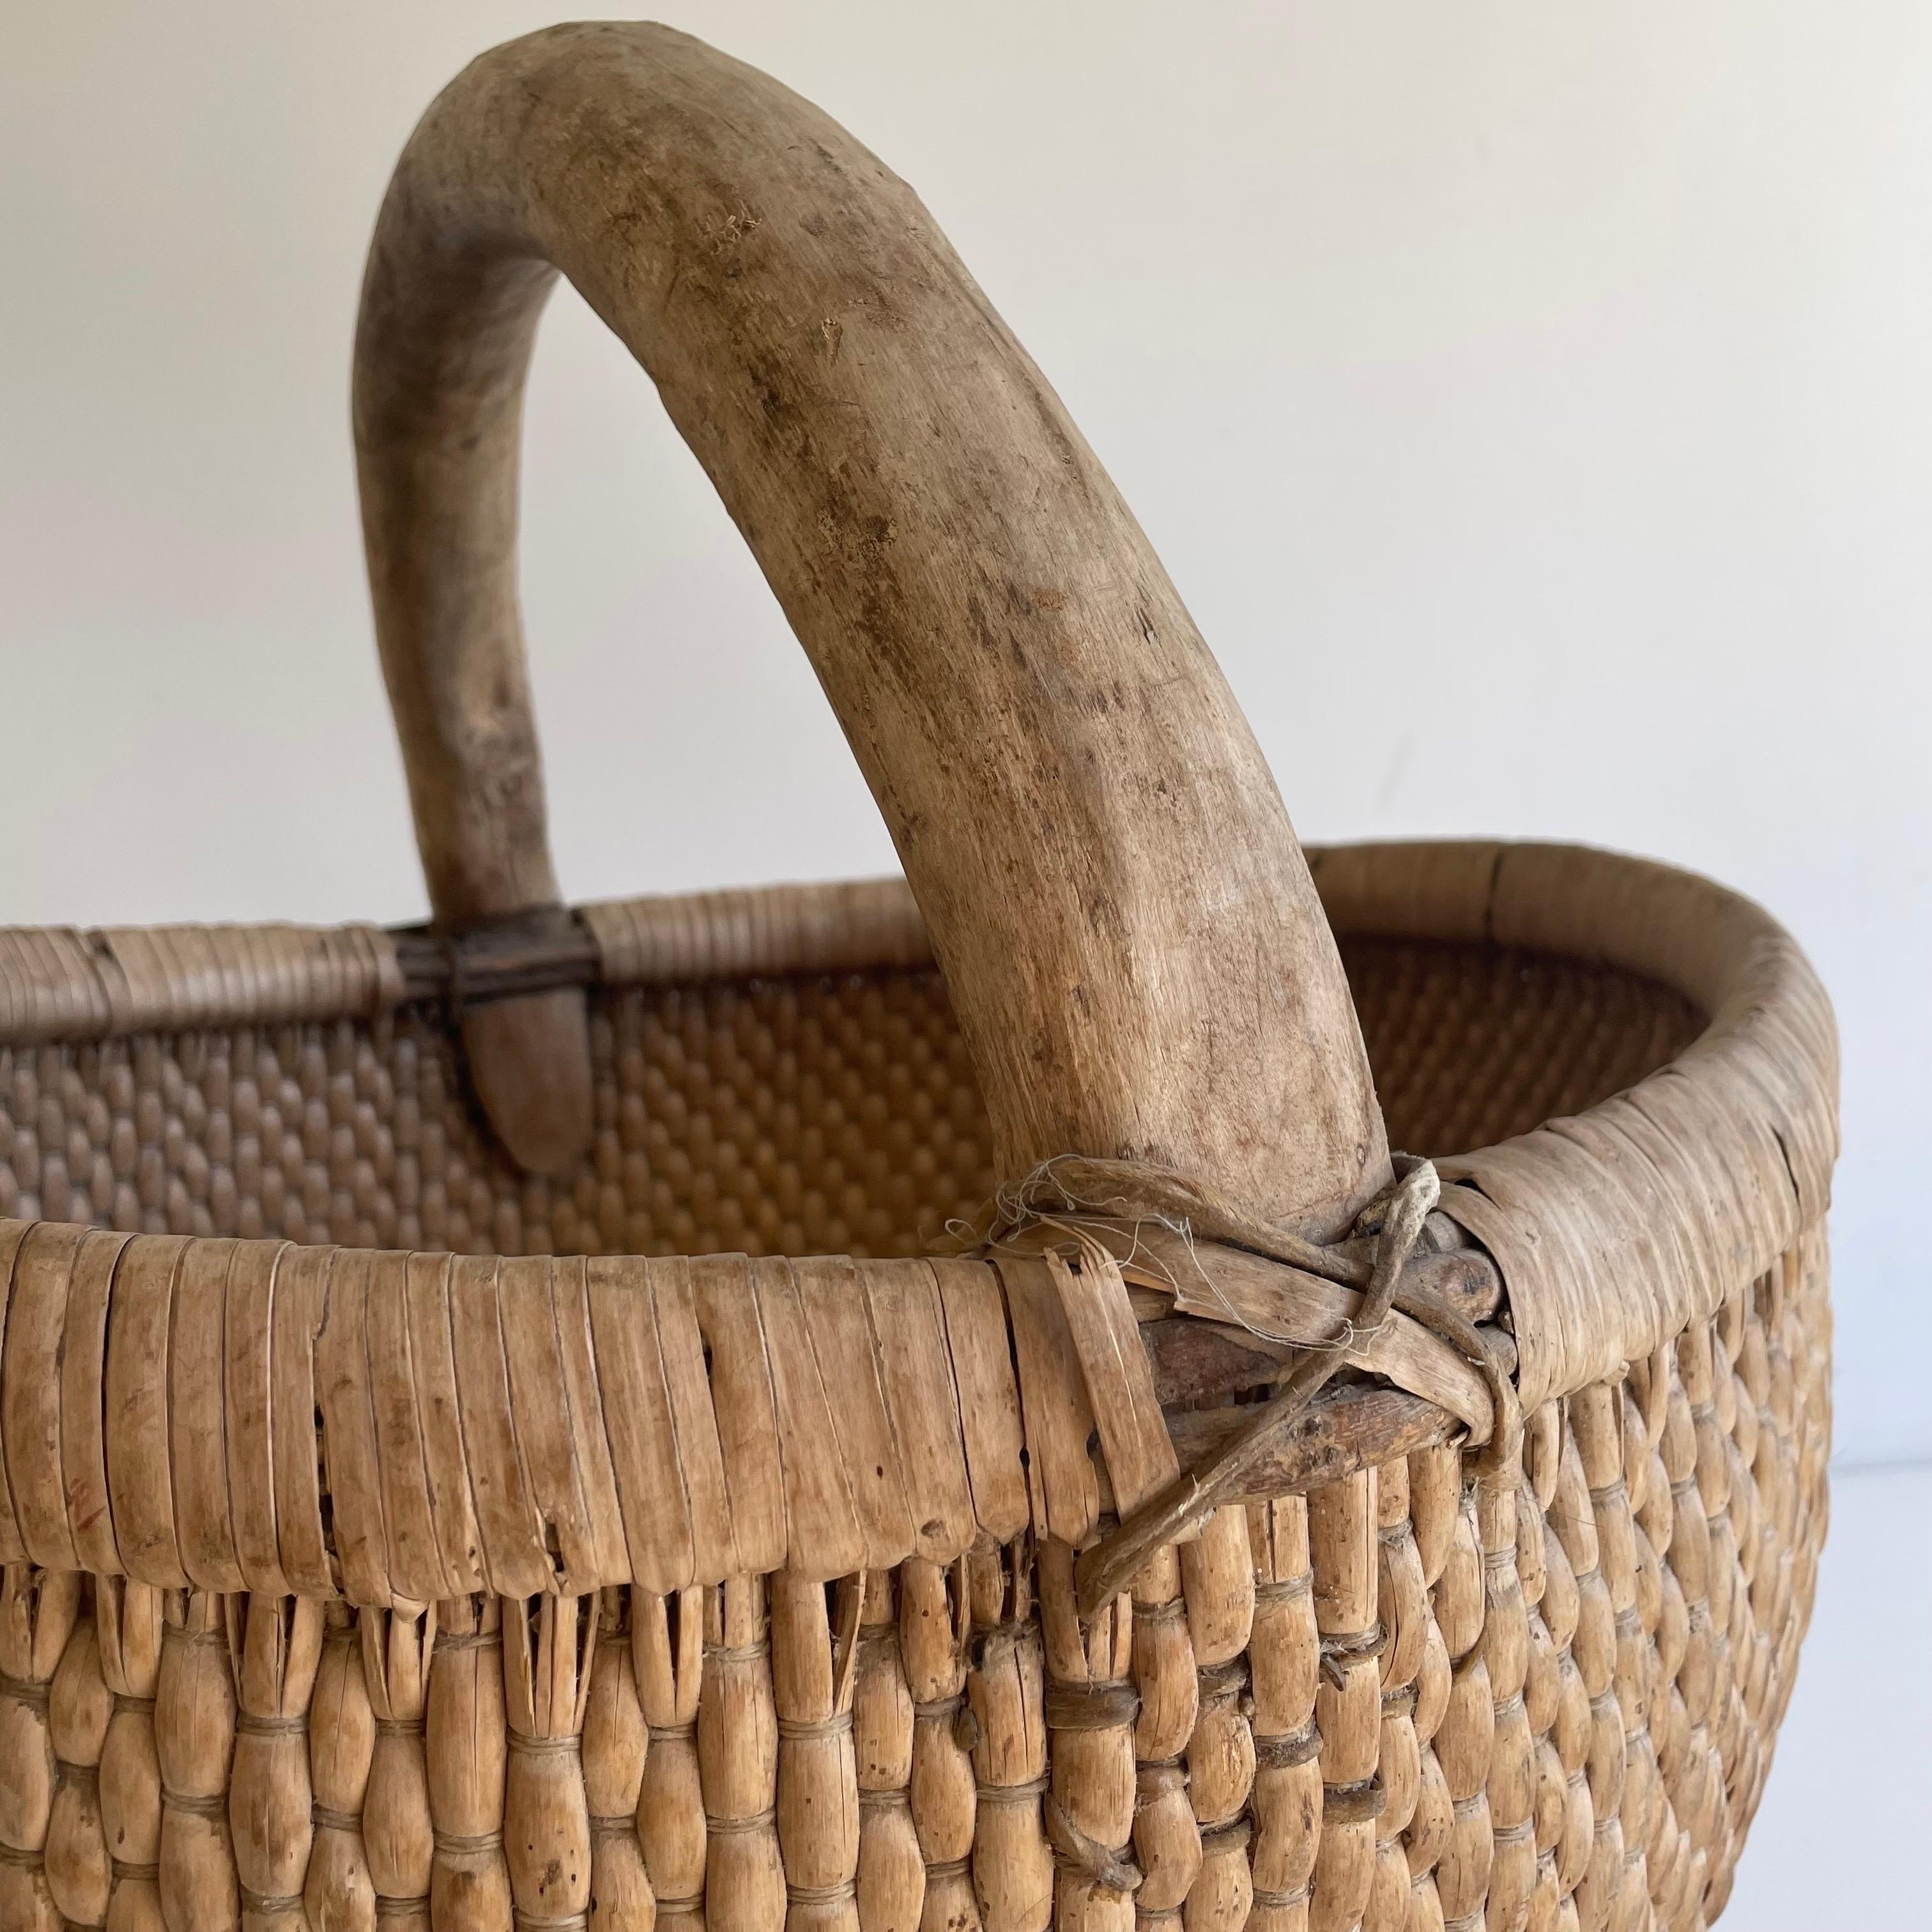 Vintage Woven Wicker Basket with Handle 1